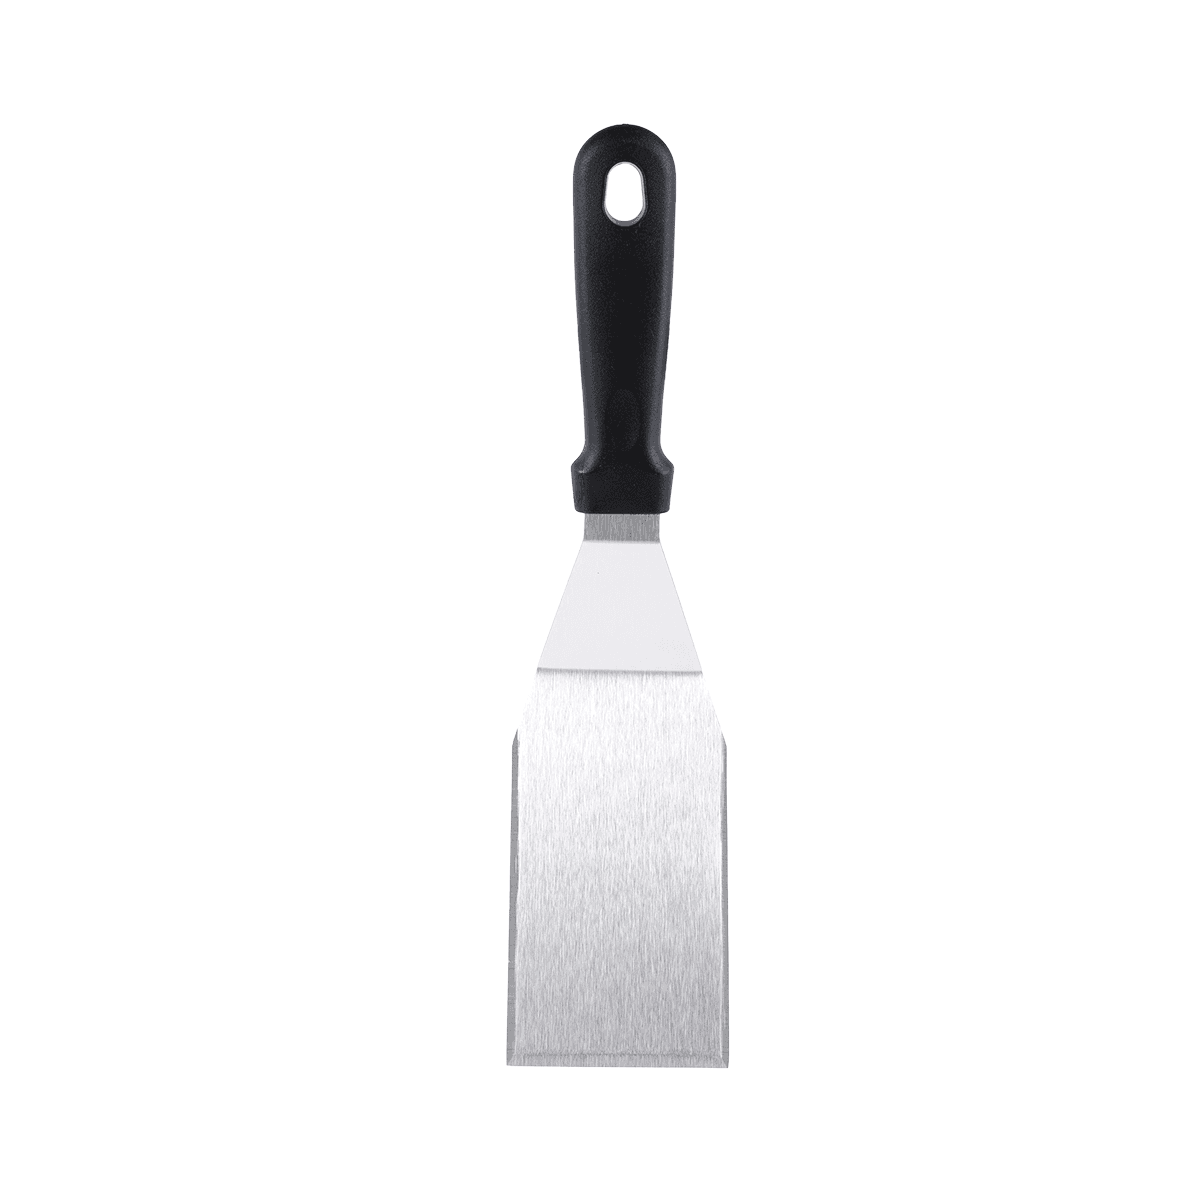 Vague Stainless Steel Shovel with Handle Black Silver Stainless Steel